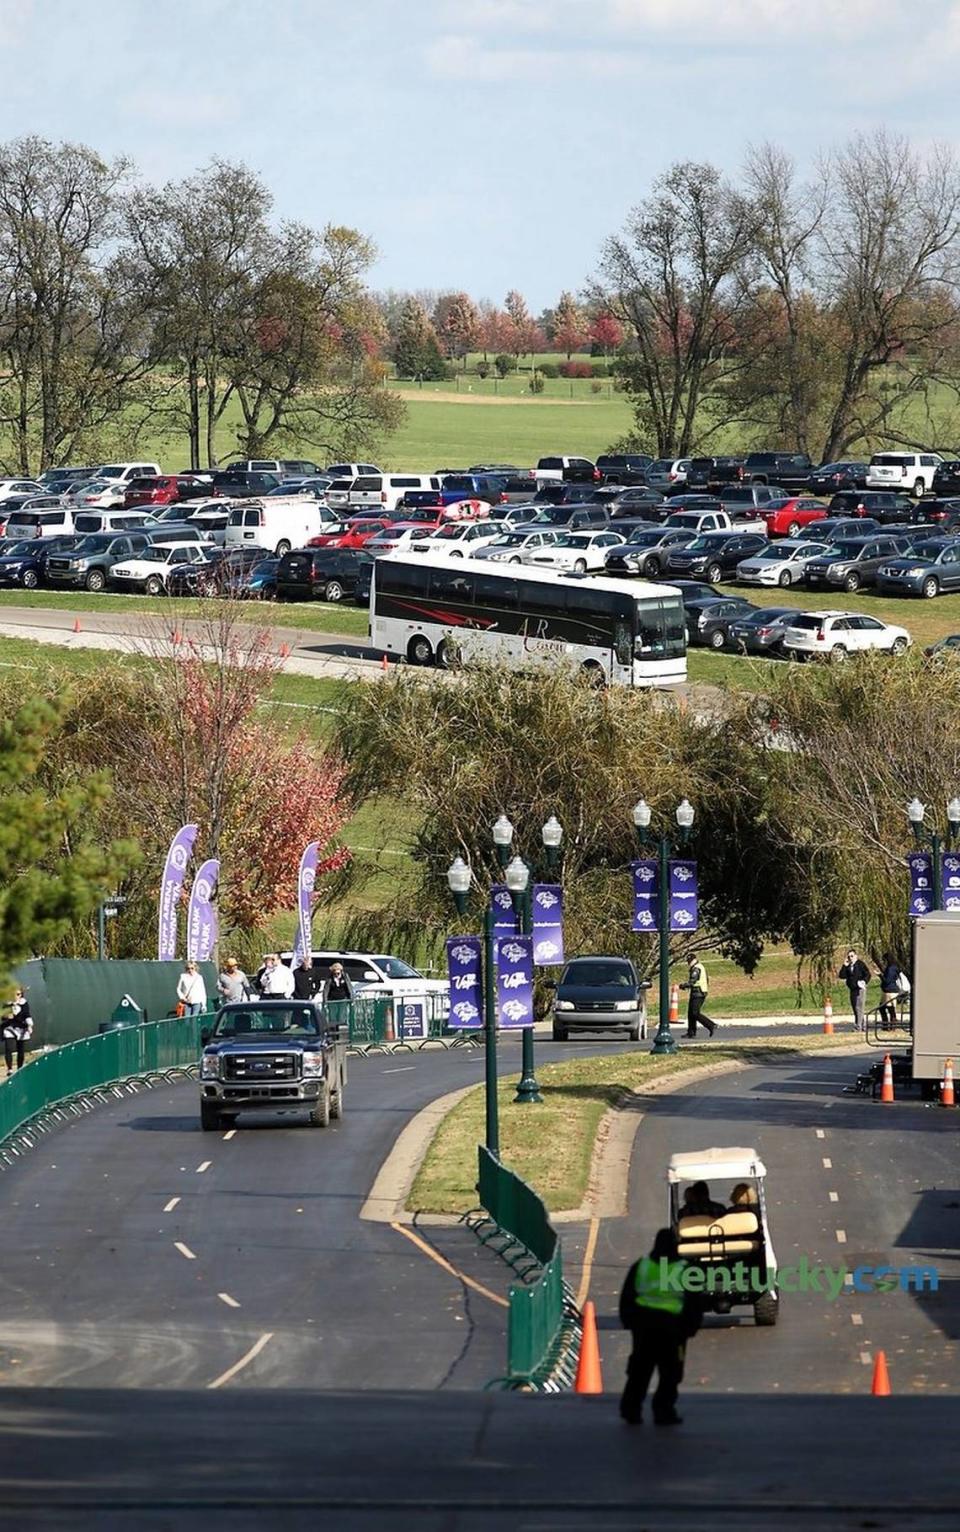 Buses transported guests from “The Hill” at Keeneland in 2018. The field parking will remain free with continuous shuttles available.